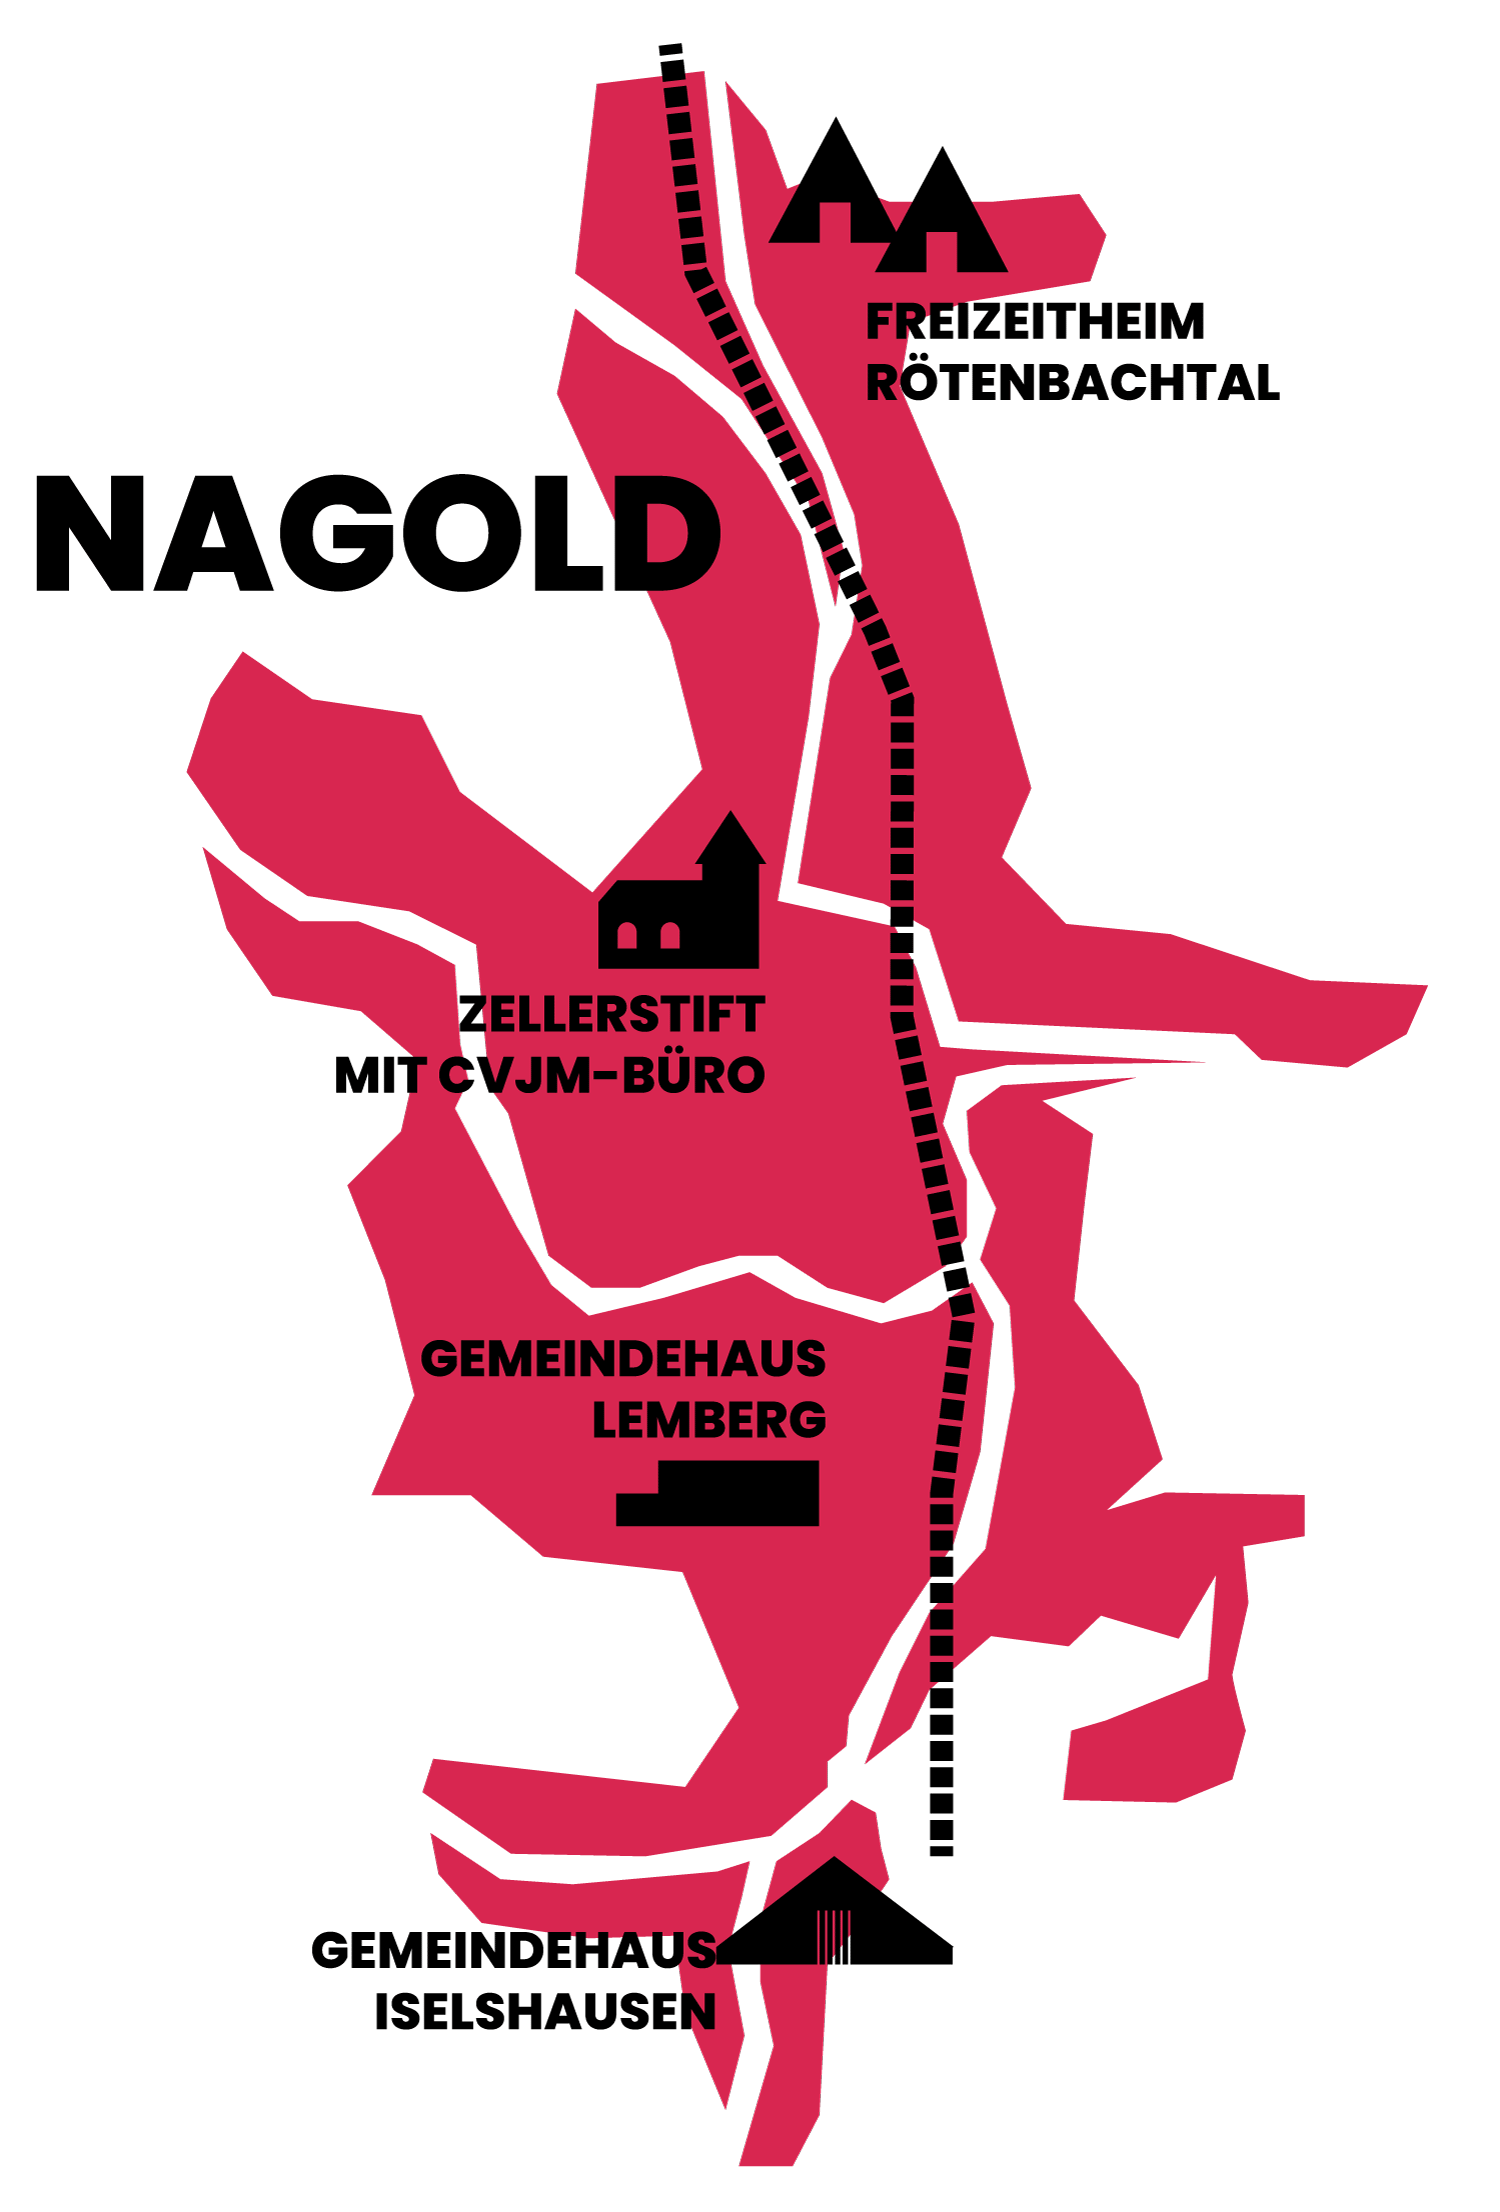 Wo wir in Nagold überall sind